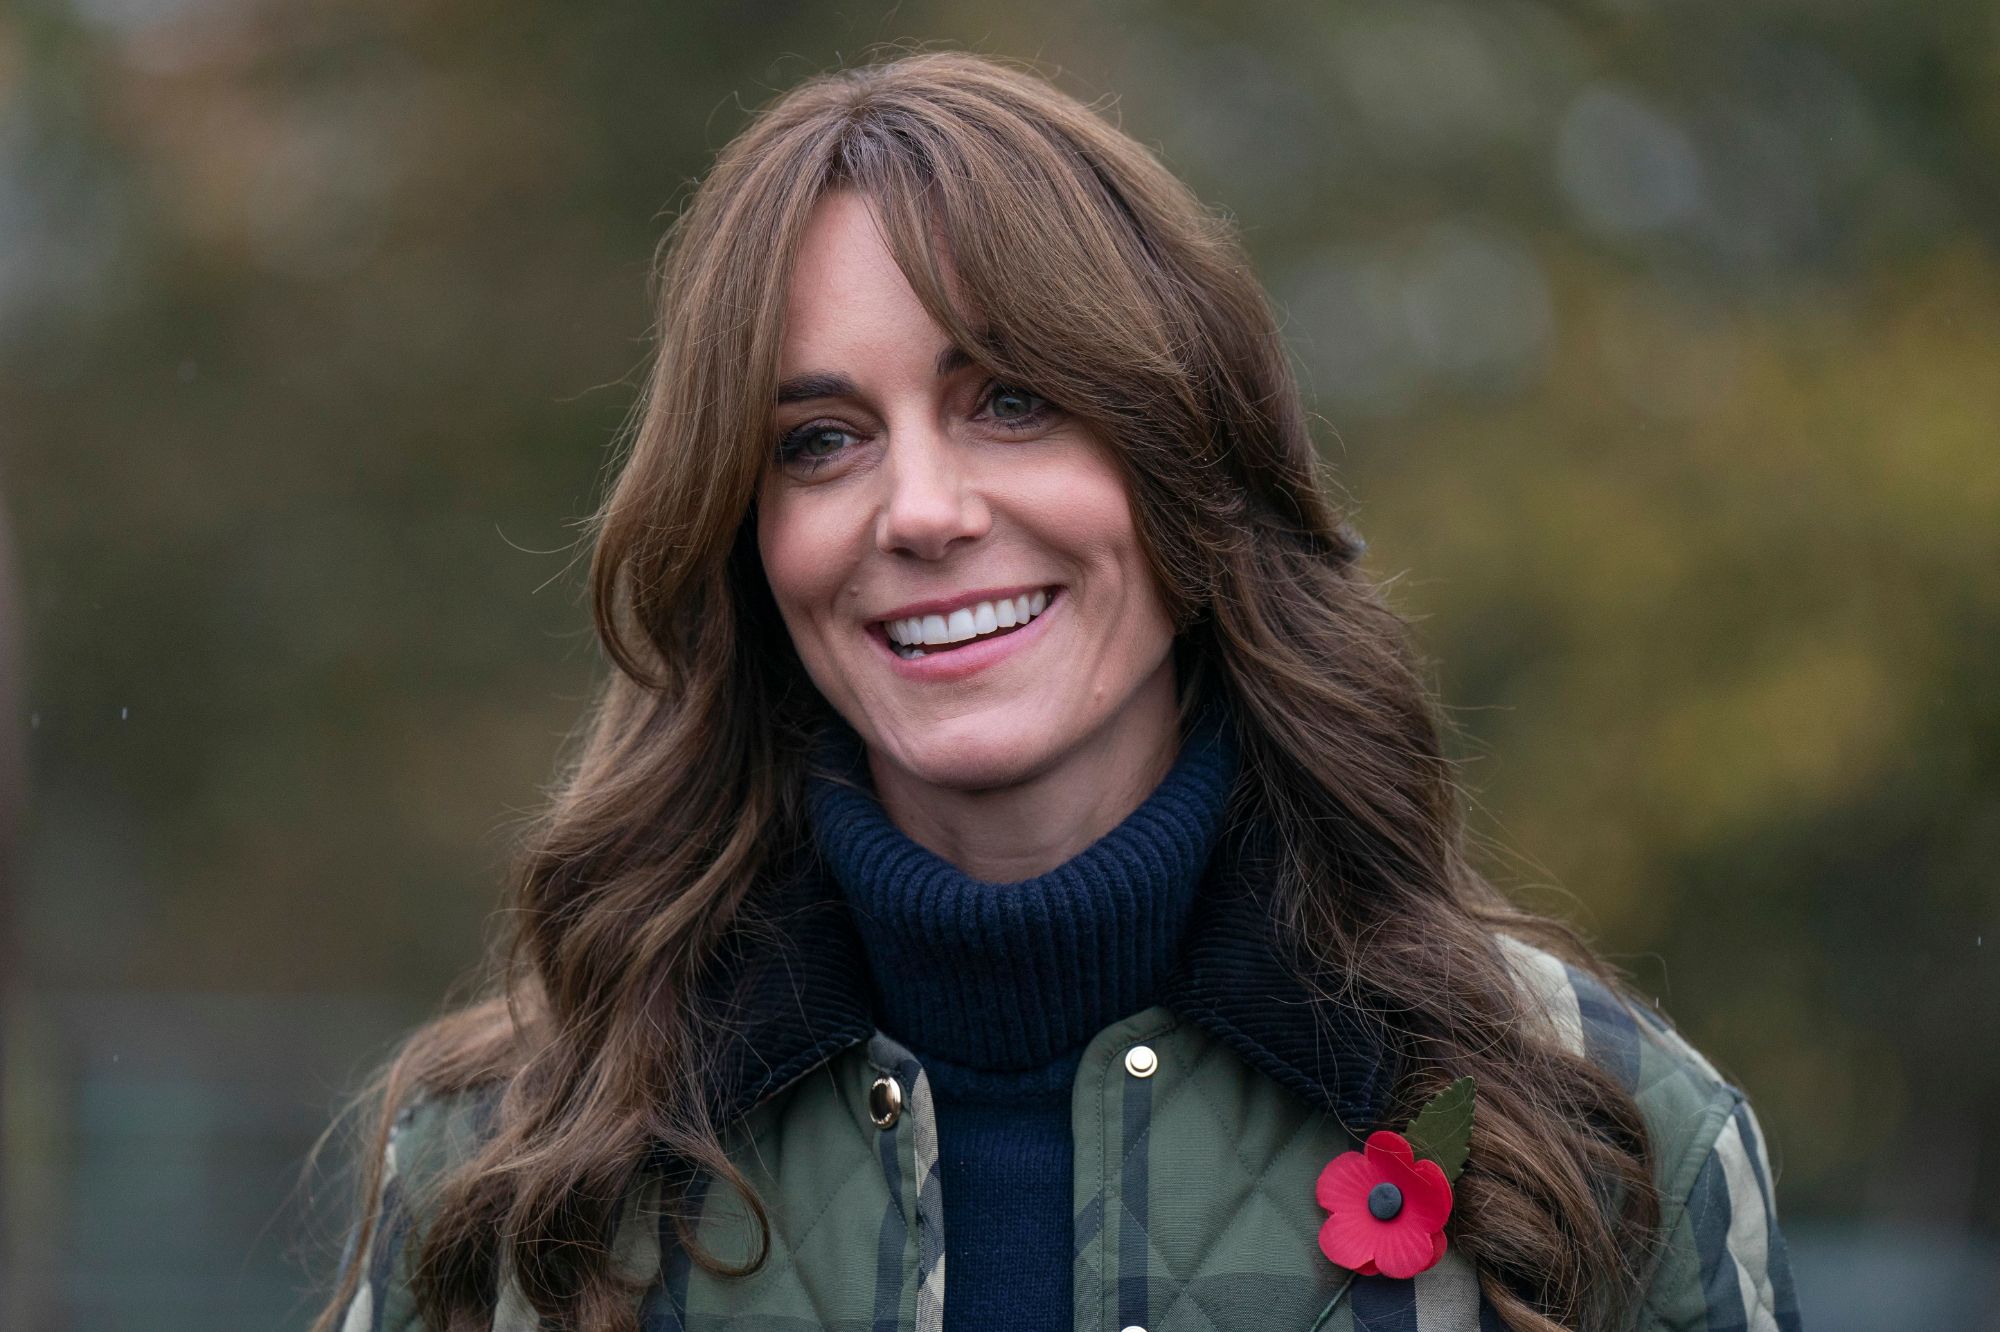 Kate Middleton shows us how Christmas sweaters can be chic and elegant.